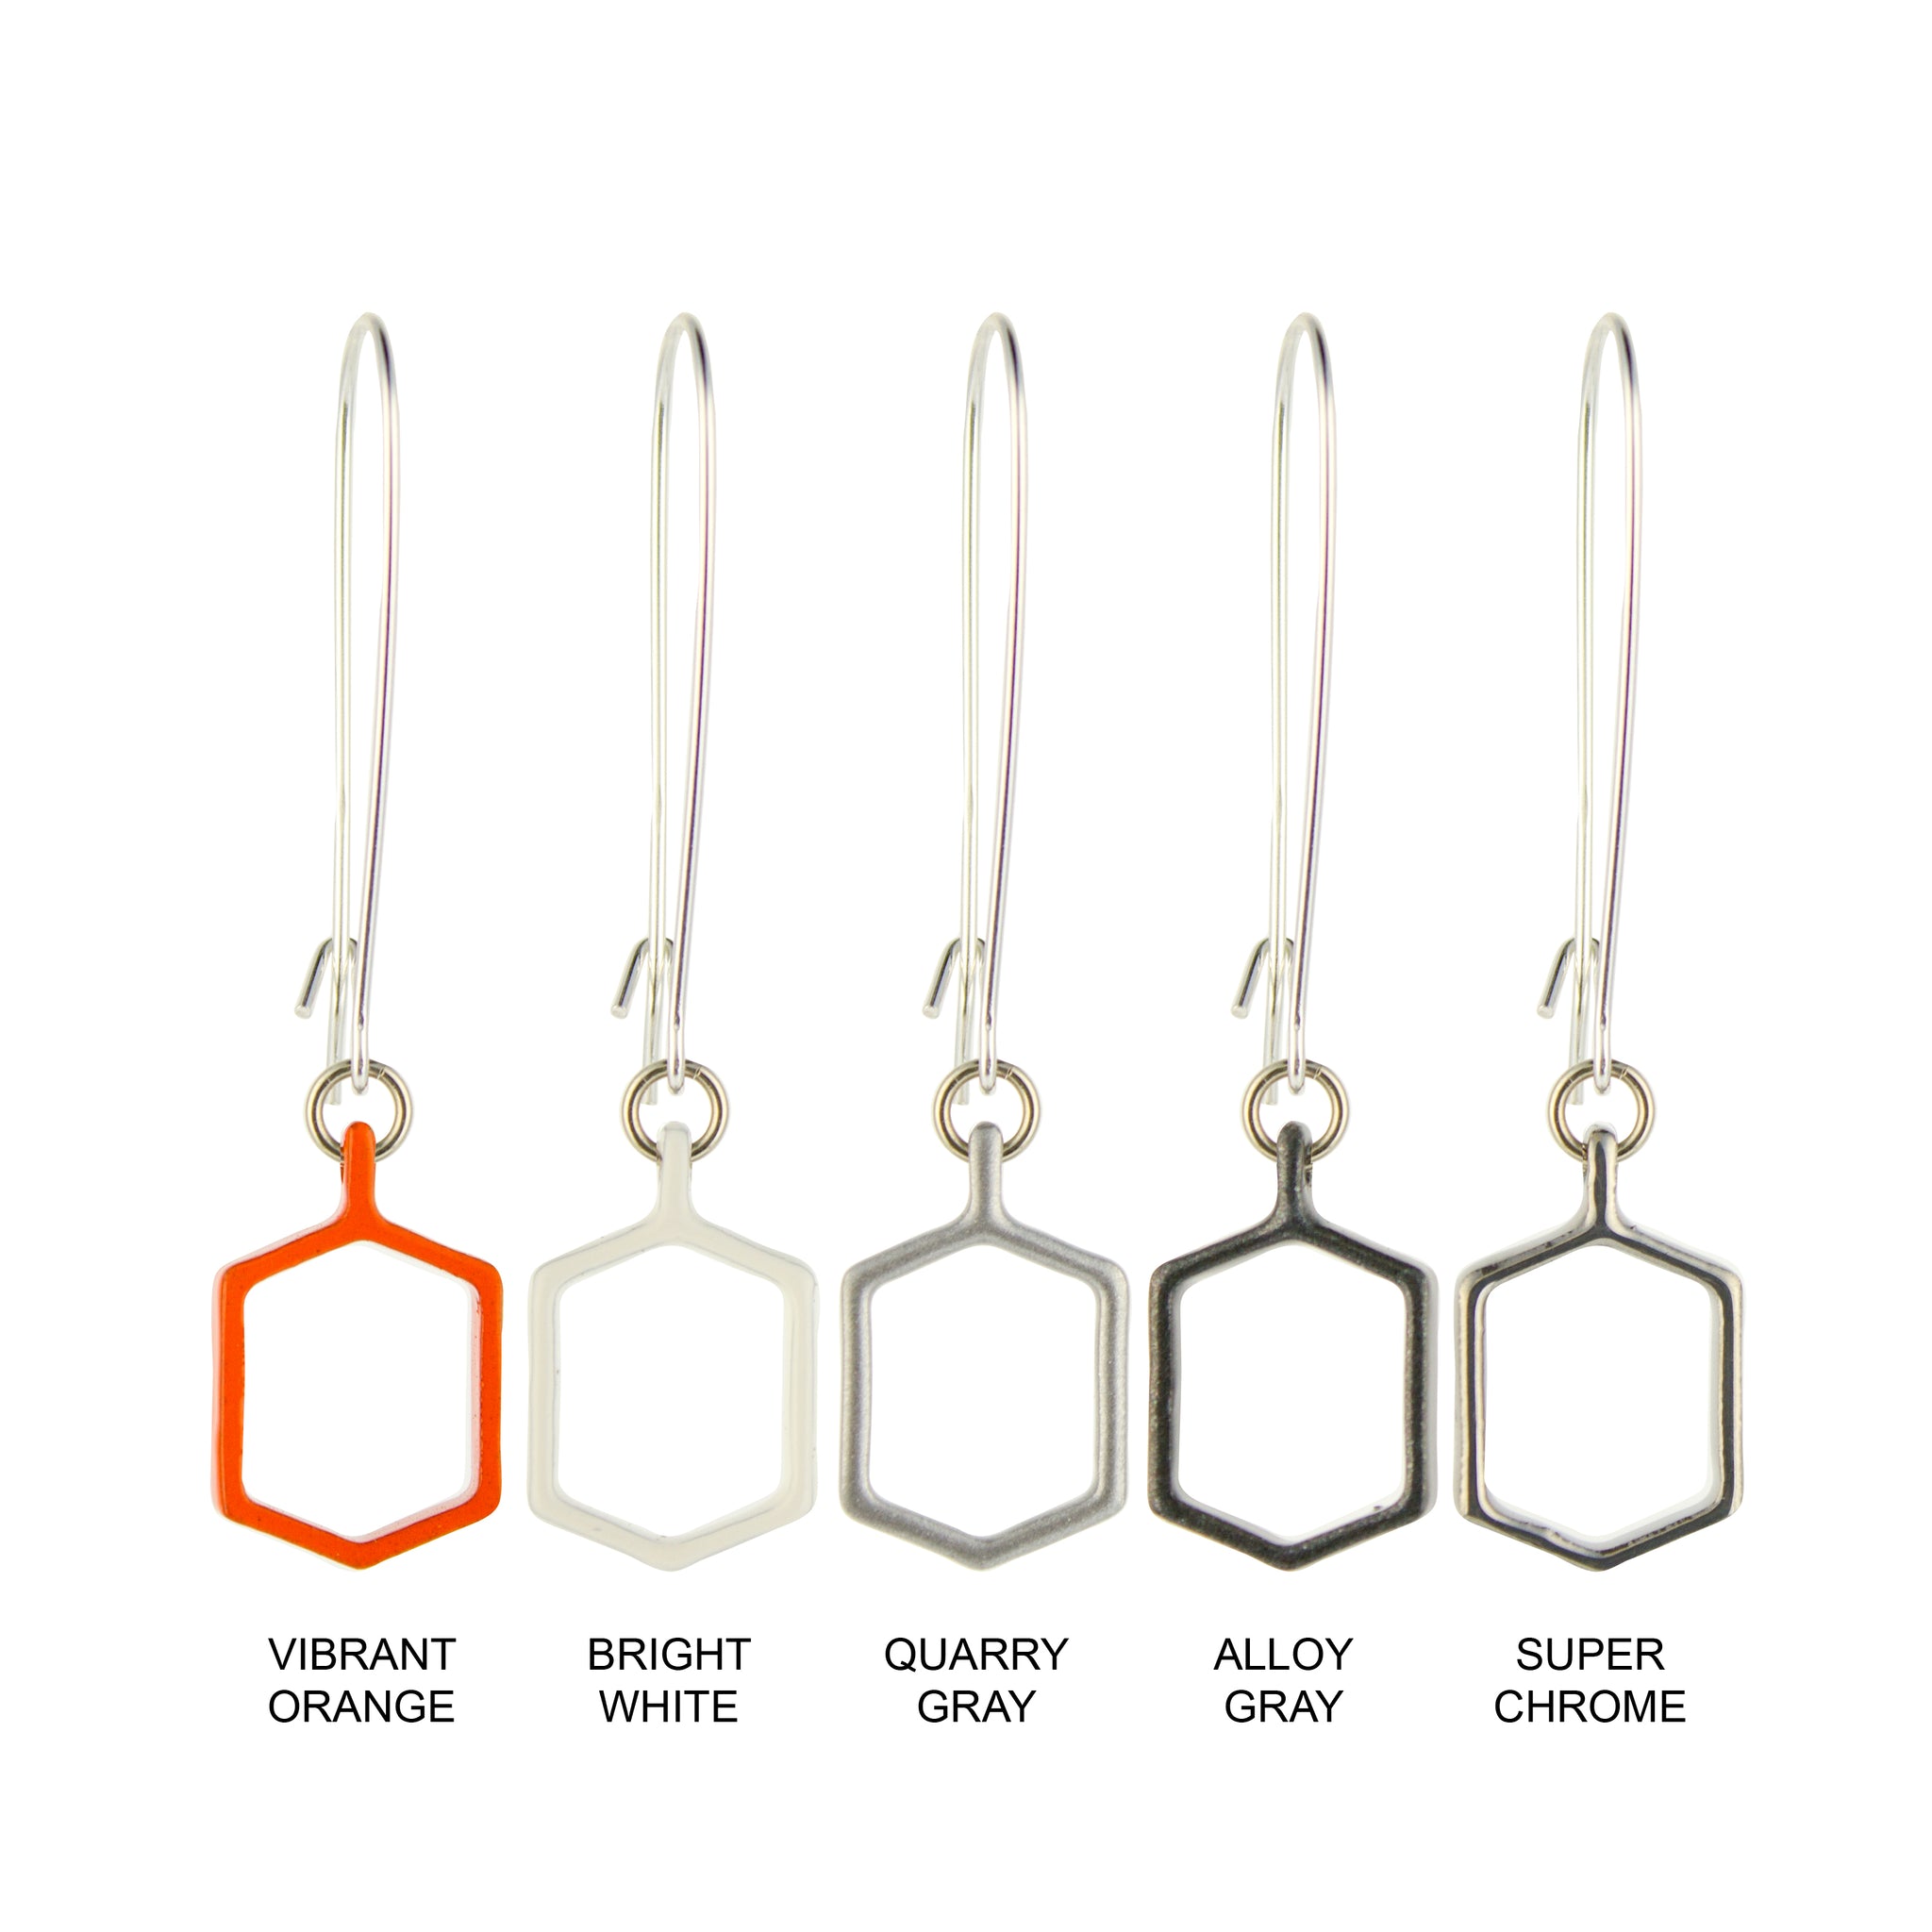 Alloy_Gray - WITHIN x COMMON GROUND Earring Flat View Colorways